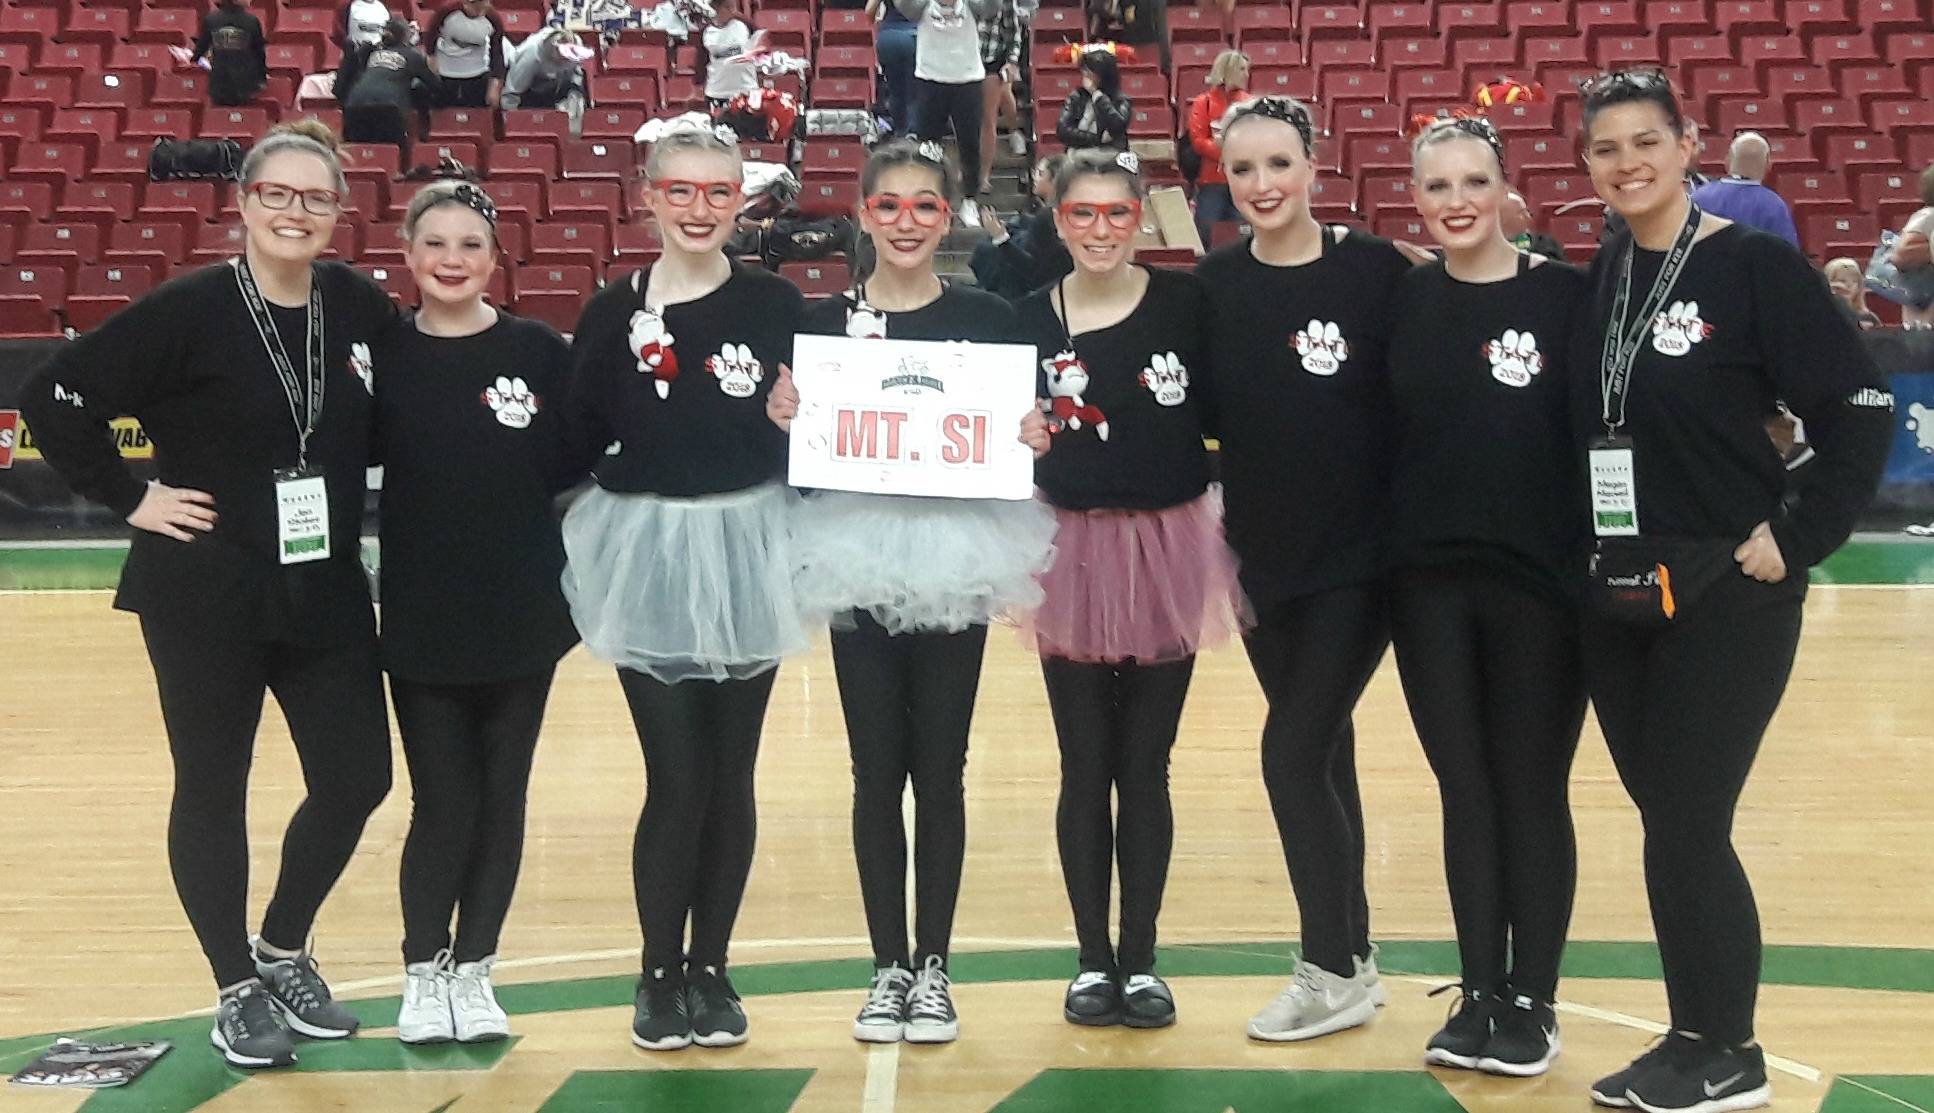 Mount Si High’s dance team at the state competition at the Yakima Sundome, from left to right: Head coach Jen Stokes, Kimby Blomquist, lieutenant Gracie Stokes, captain CJ Tse, captain Morgan Wadsworth, Clarissa Ricks, Camille Ostrem and coach Megan Maxwell. The team finished its third year by placing fifth at state in Military and third in their newest category, Kick, in which the girls took first in at districts. The team is going to nationals this year. There will be a tryout prep clinic from 3:30-5p.m. on April 25, and tryouts start April 30, continue May 2 and finish May 4 in the Freshman Campus Gym. Tryouts are open to current 8-11-graders and no dance experience is necessary. More tryout information can be found at www.mountsidanceteam.weebly.com. Photo courtesy of Mount Si High